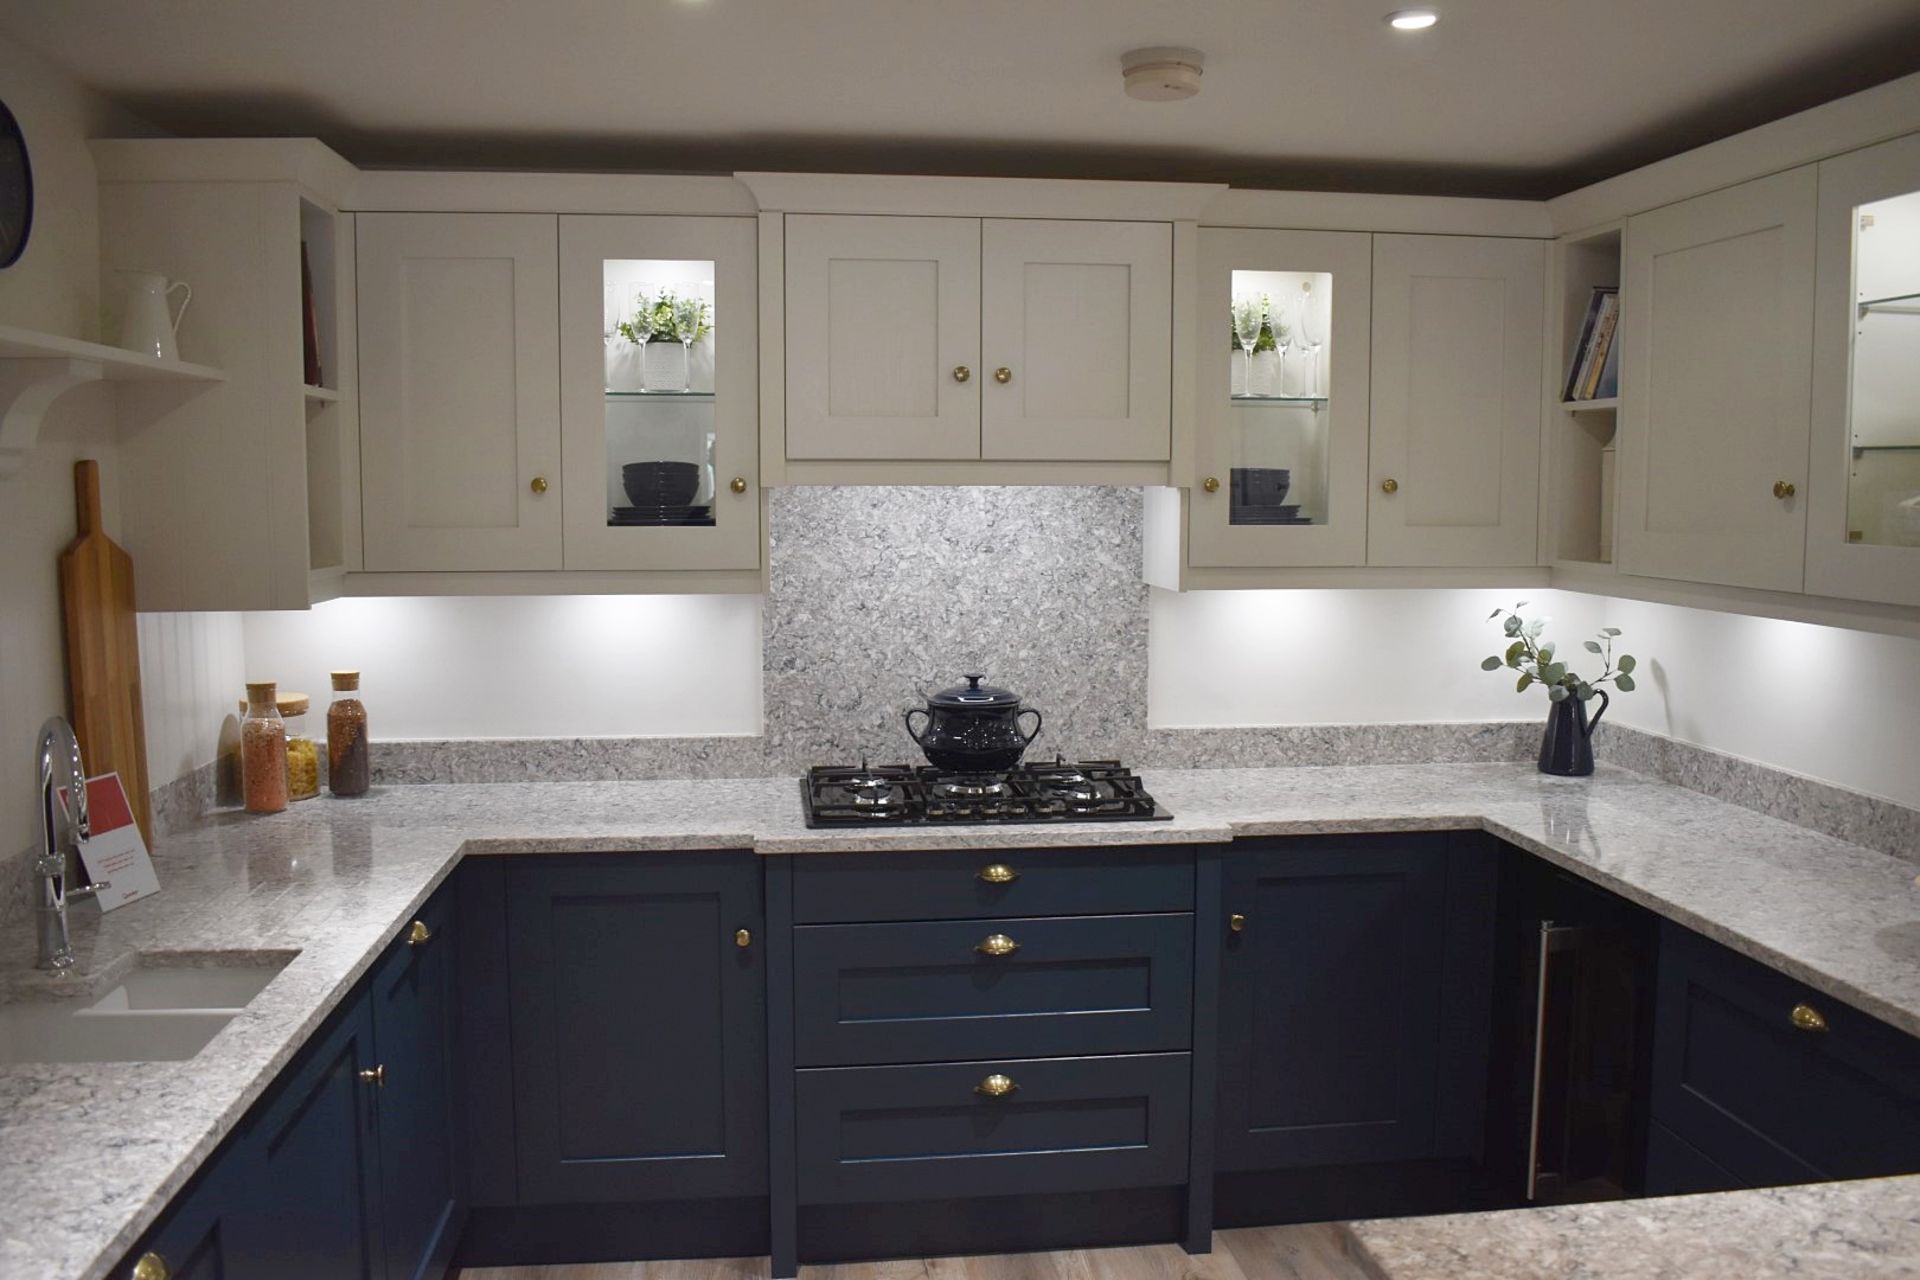 1 x 'Mornington' Shaker-style Feature-rich Fitted Kitchen in Blue, with Premium Branded Appliances - Image 3 of 67